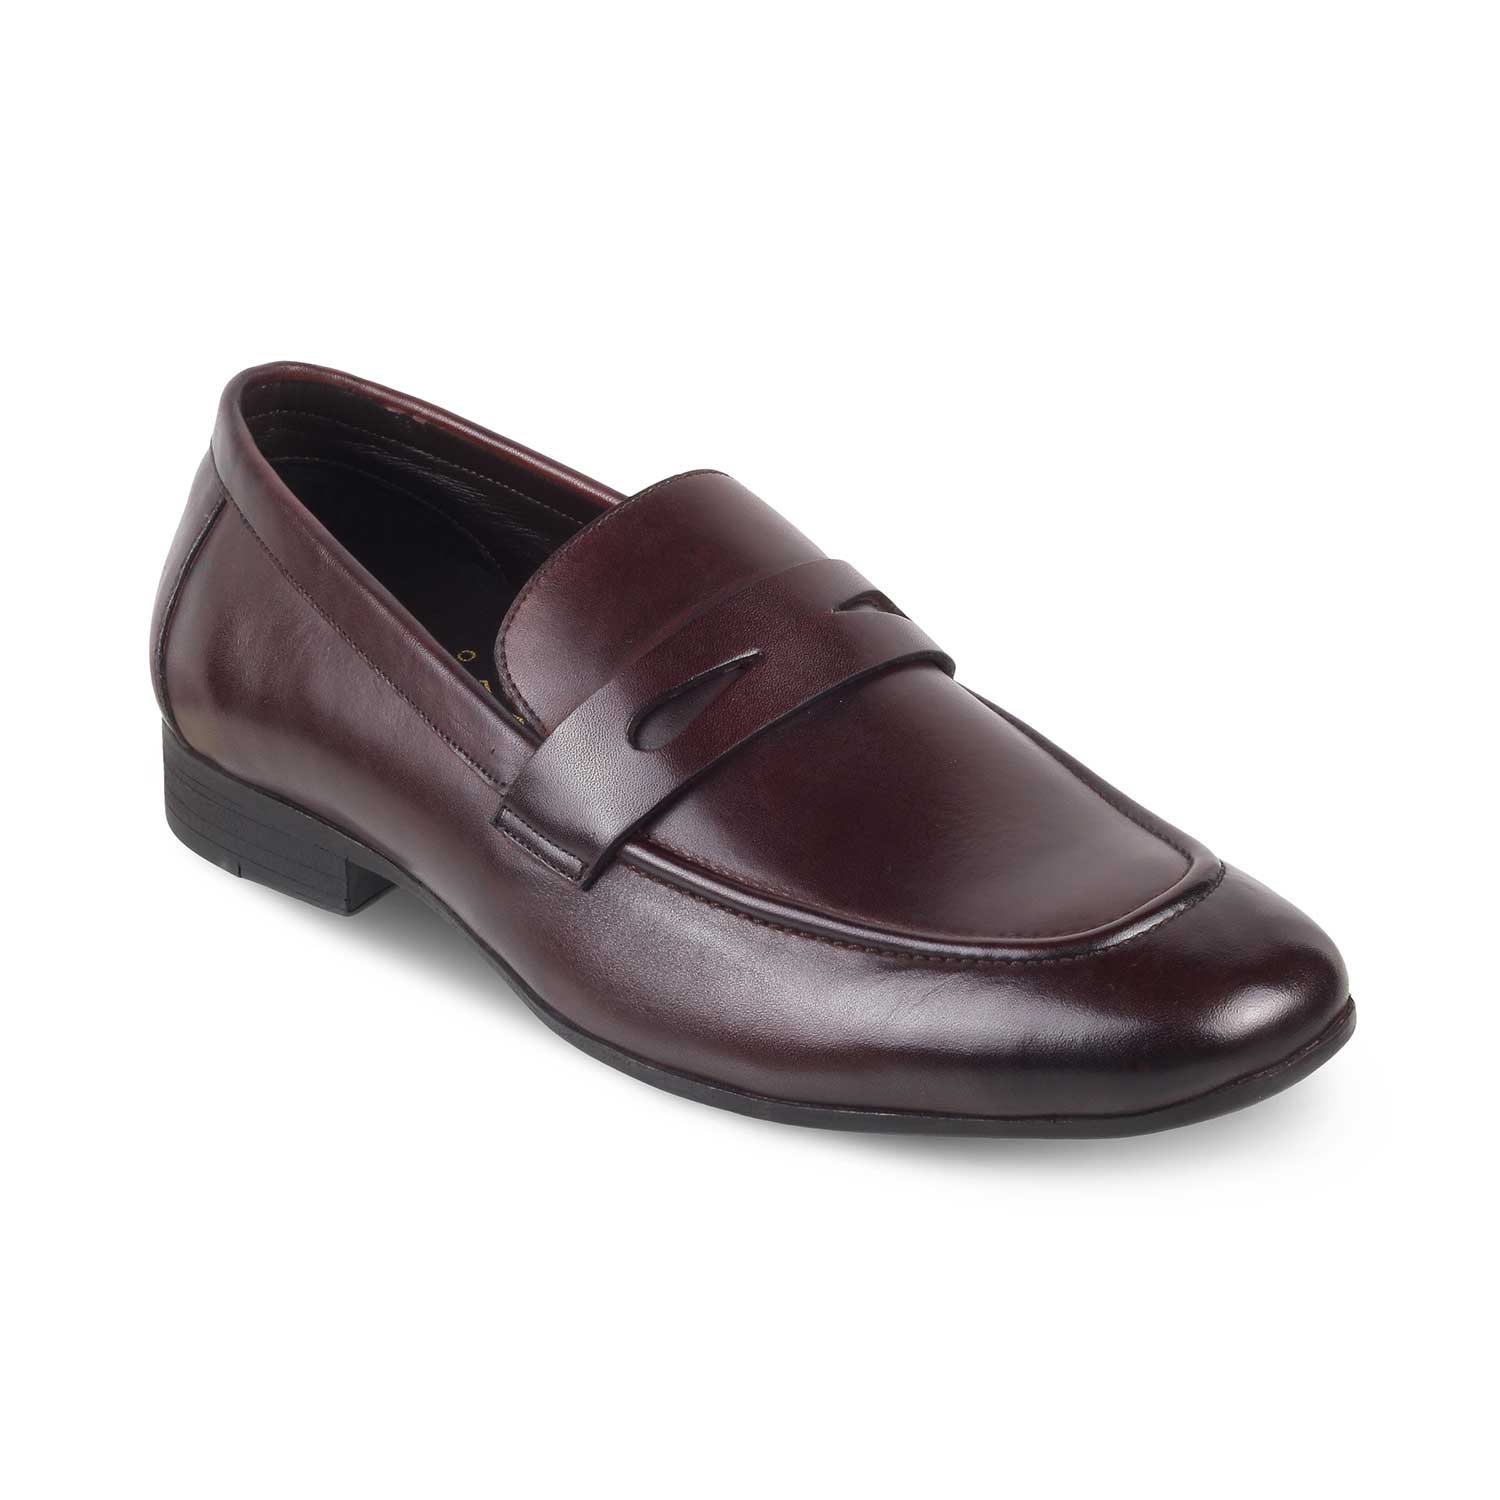 Apenny Brown Men's Leather Penny Loafers Online at Tresmode.com